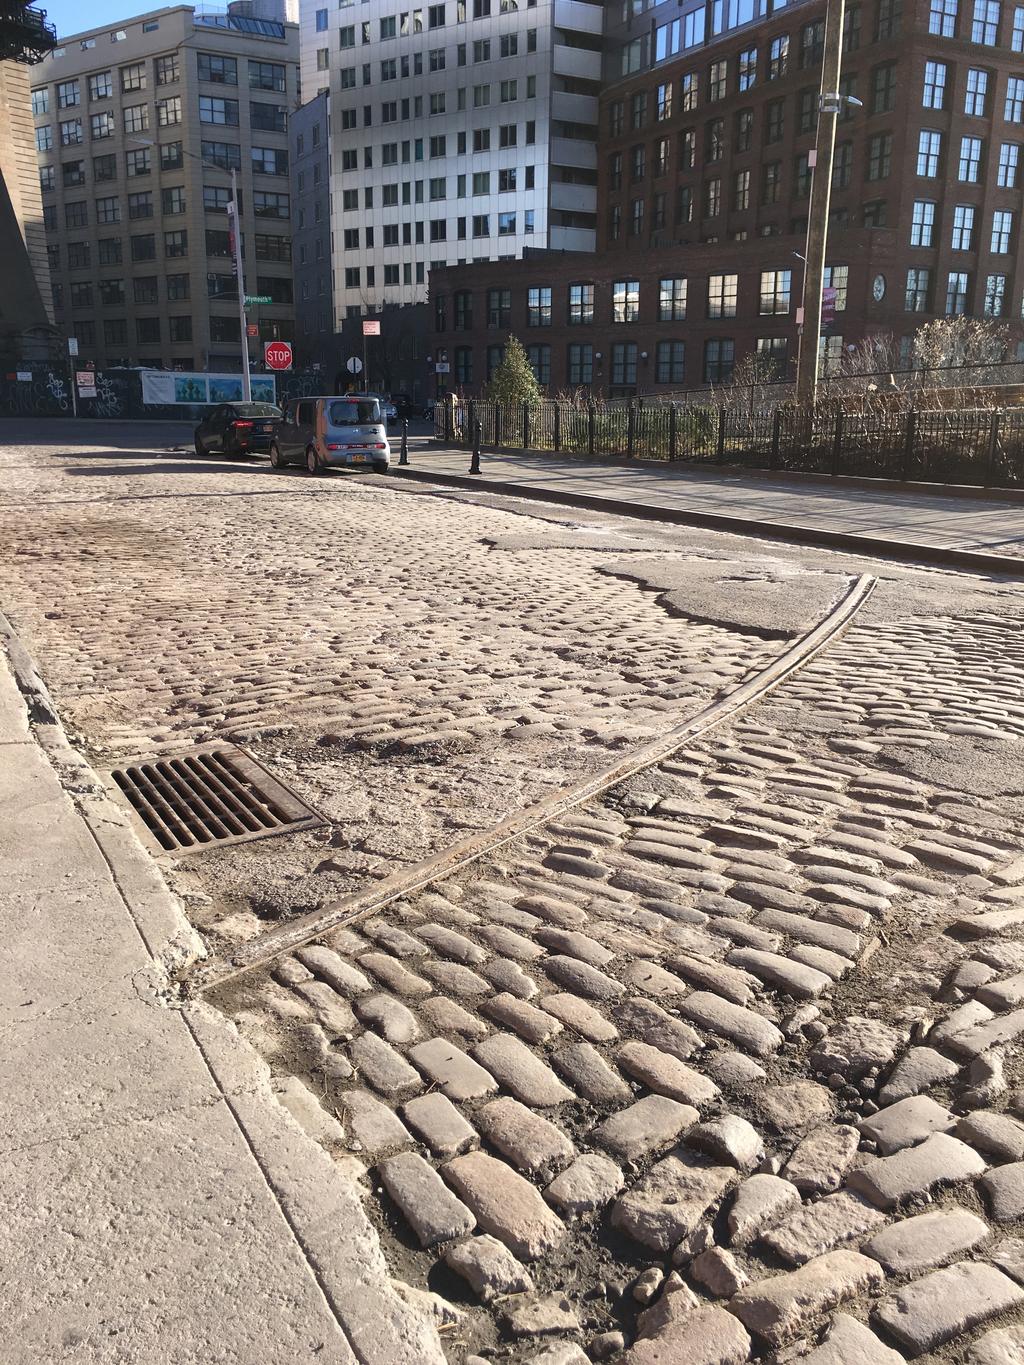 This is a picture of Water St. in Dumbo, a cobblestone street that shows how little this neighborhood has changed.